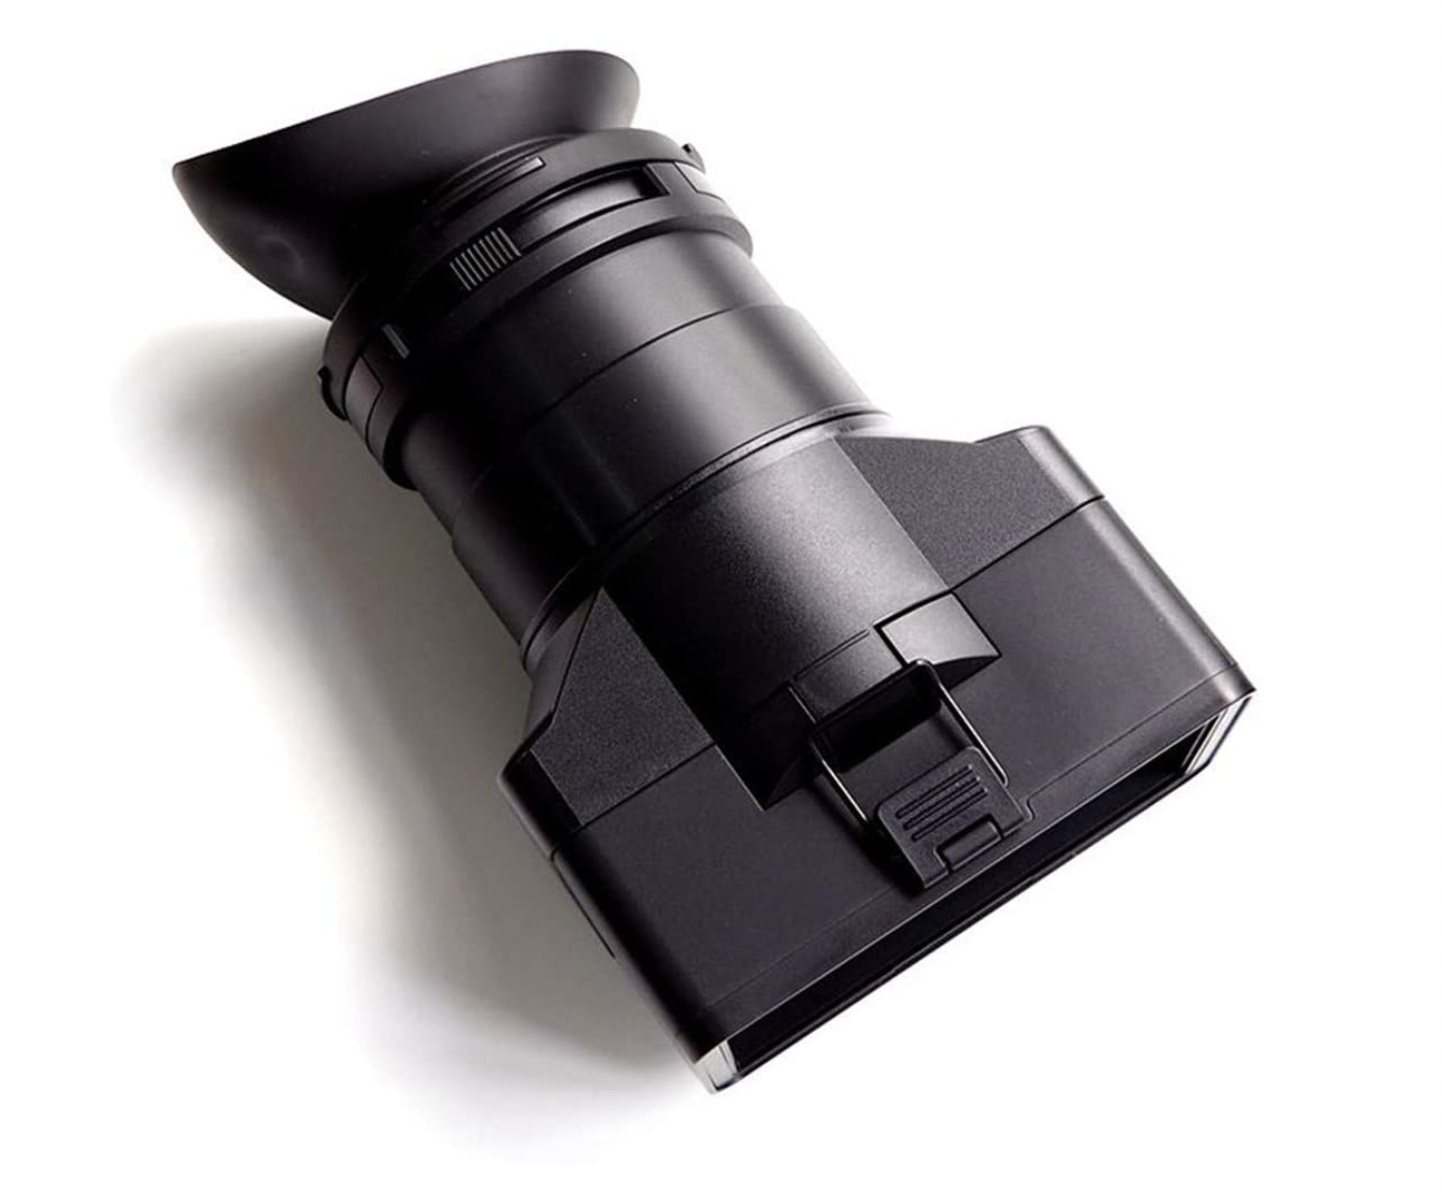 Sony Pt No. A2063335A Viewfinder Block Assembly for FS7